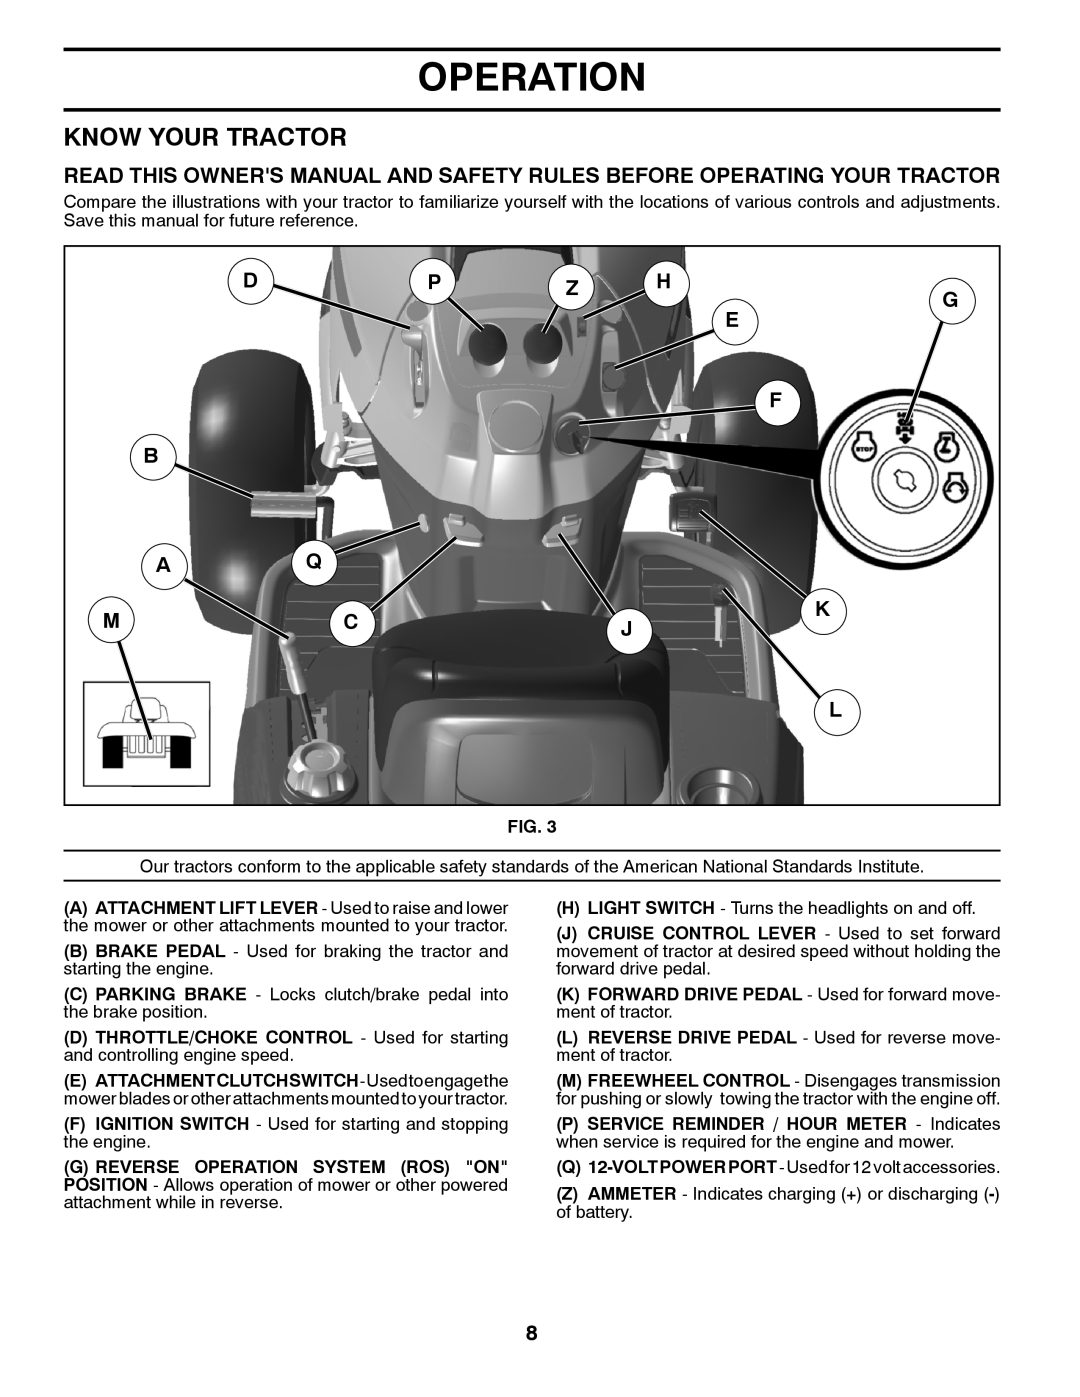 Husqvarna 2146XLS owner manual Know Your Tractor, Operation 